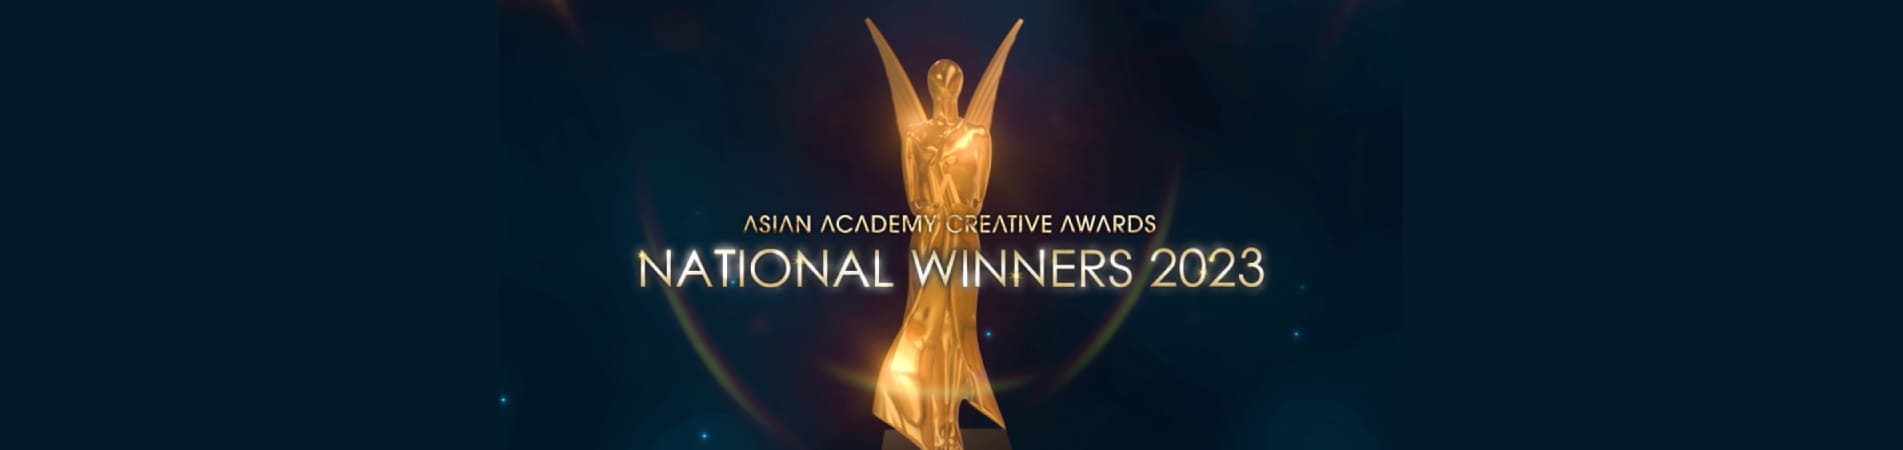 WORKPOINT RECEIVED 4 NATIONAL WINNERS IN ASIAN ACADEMY CREATIVE AWARDS [AAA] 2023